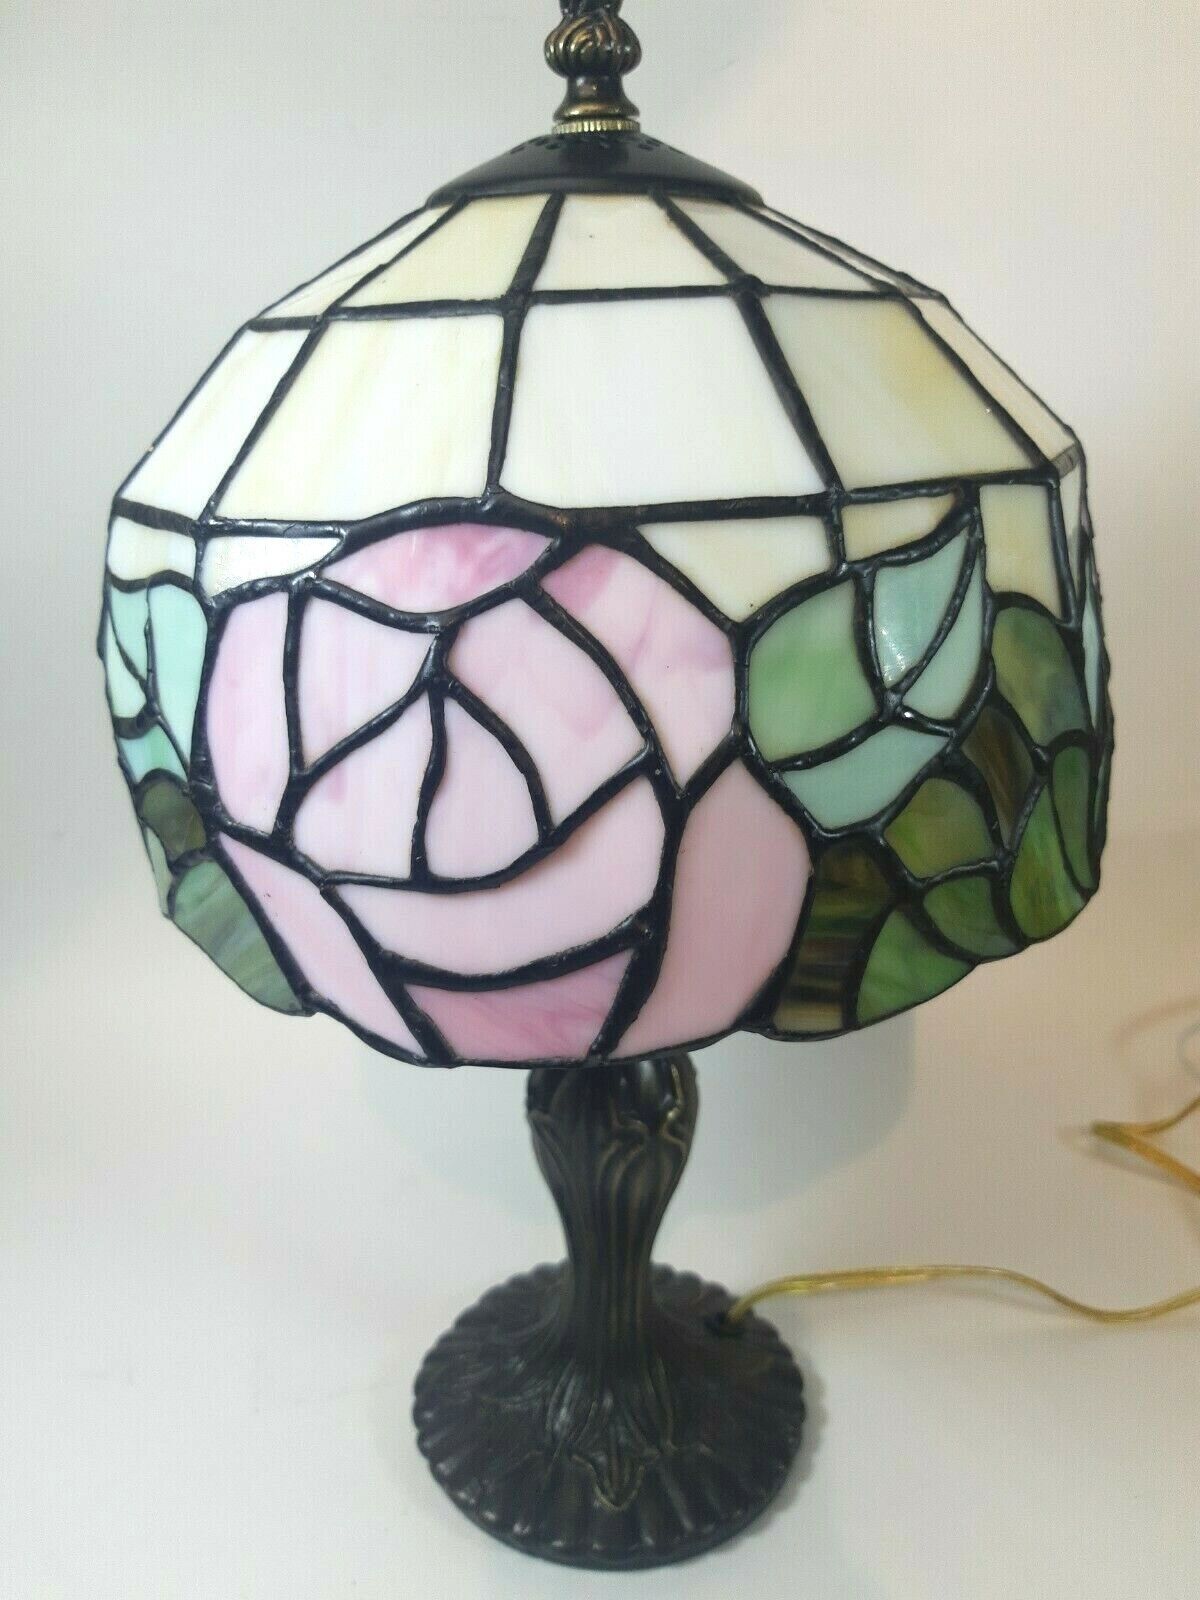 Tiffany Style Table Lamp Desk Light Rose Pink Green Stained Glass 